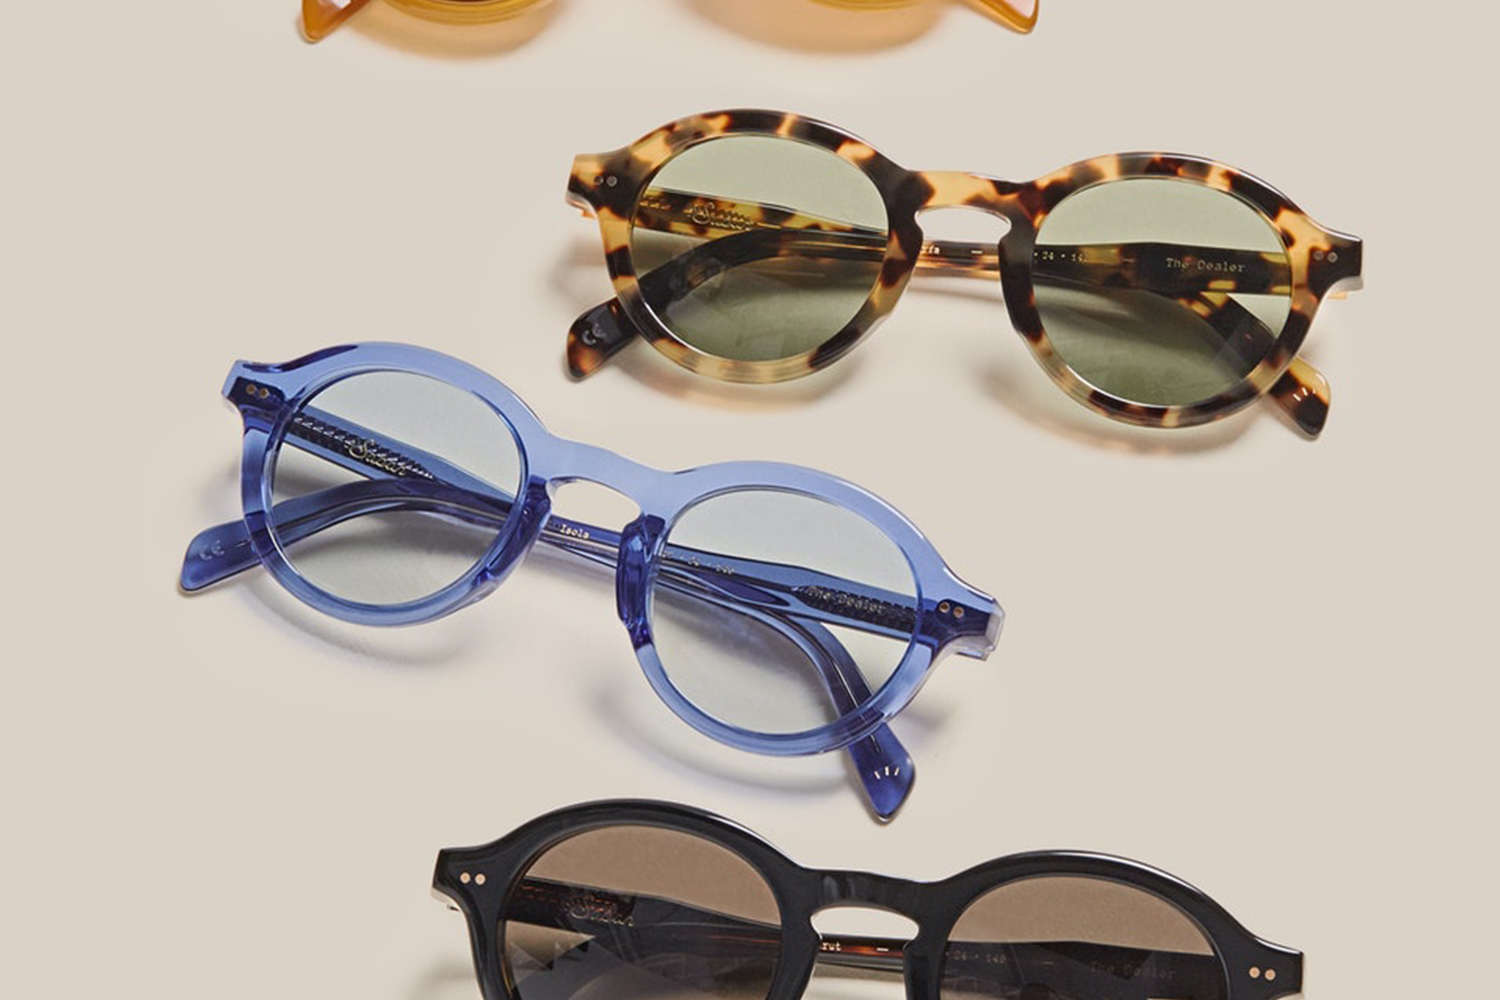 A variety of sunglasses from Sabah, a Turkish slip-on footwear brand that we love, arranged on a table